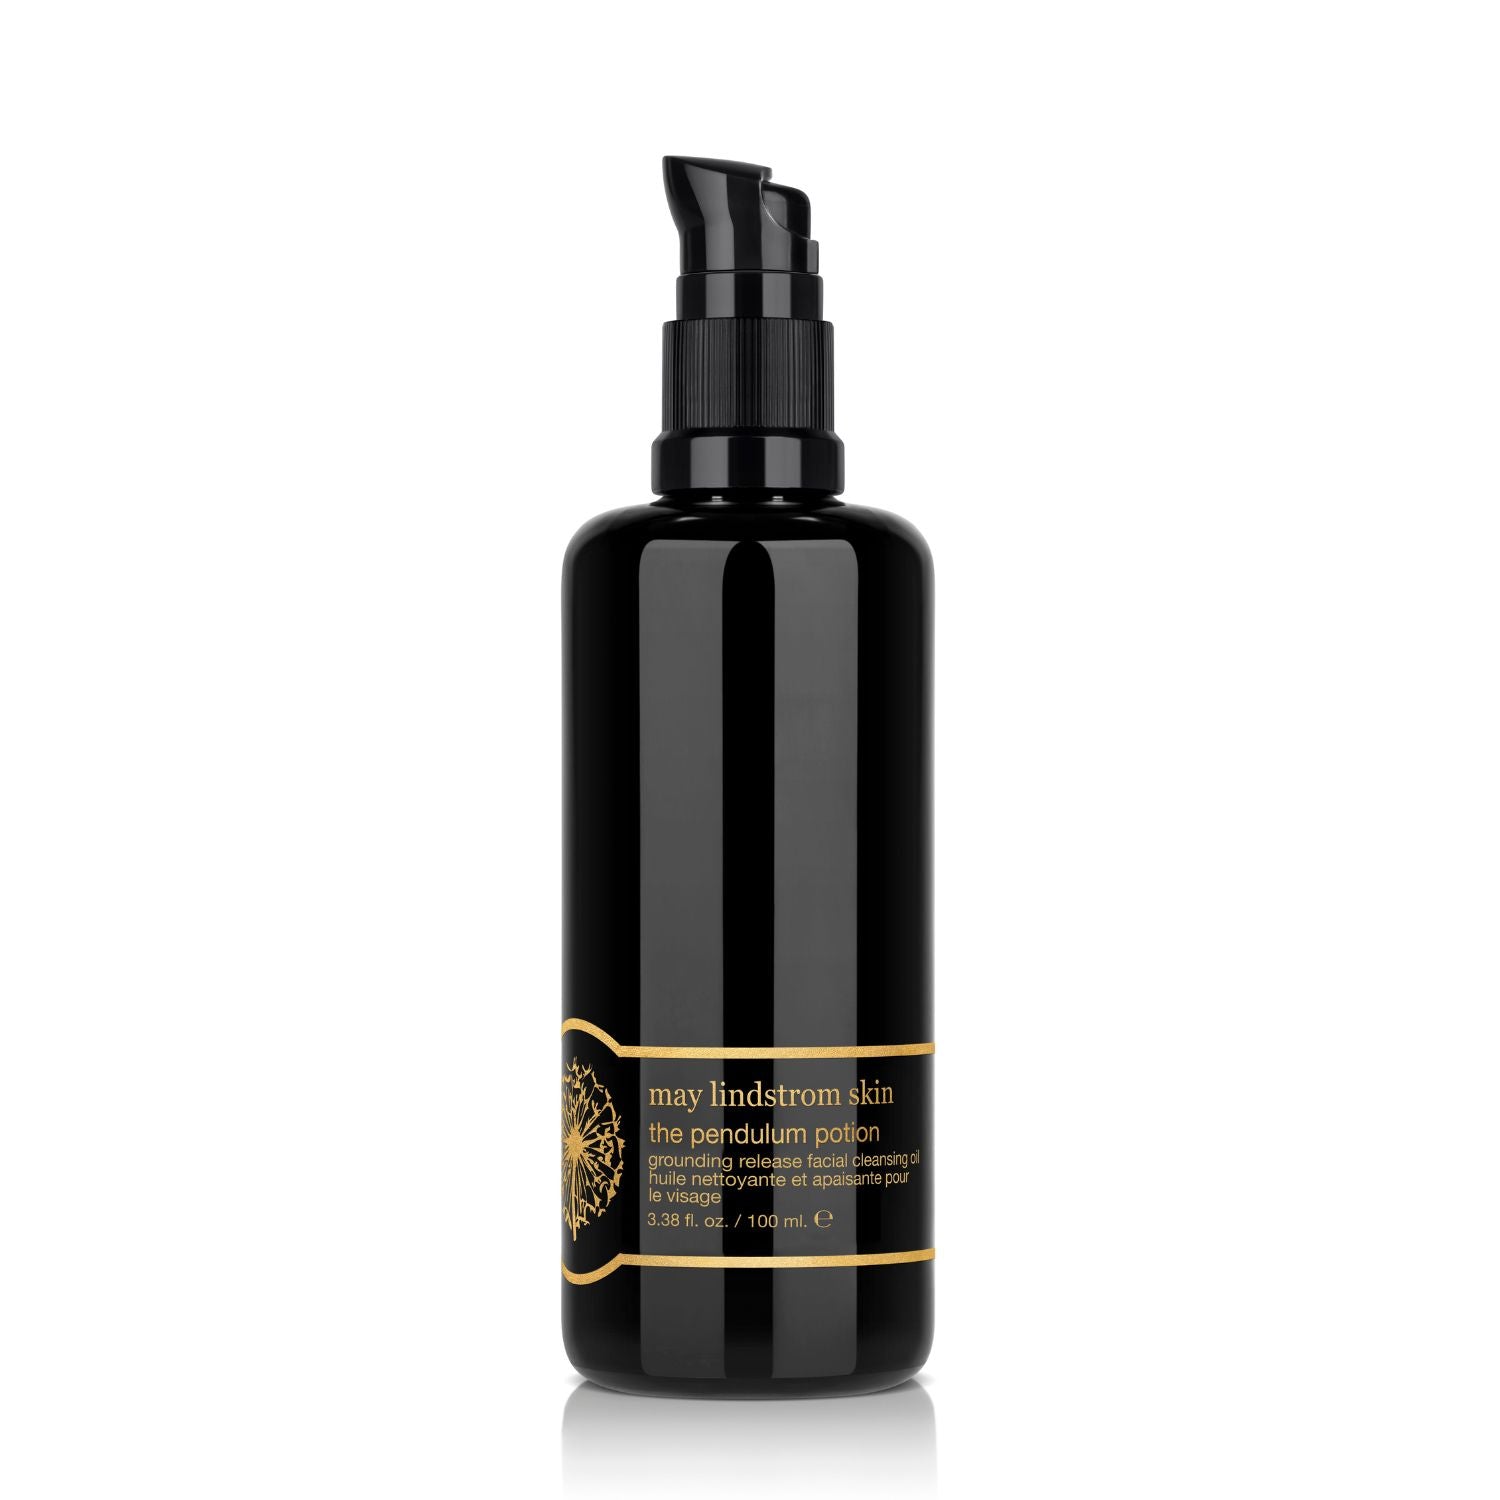 The Pendulum Potion Antioxidant Facial Cleansing Oil May Lindstrom